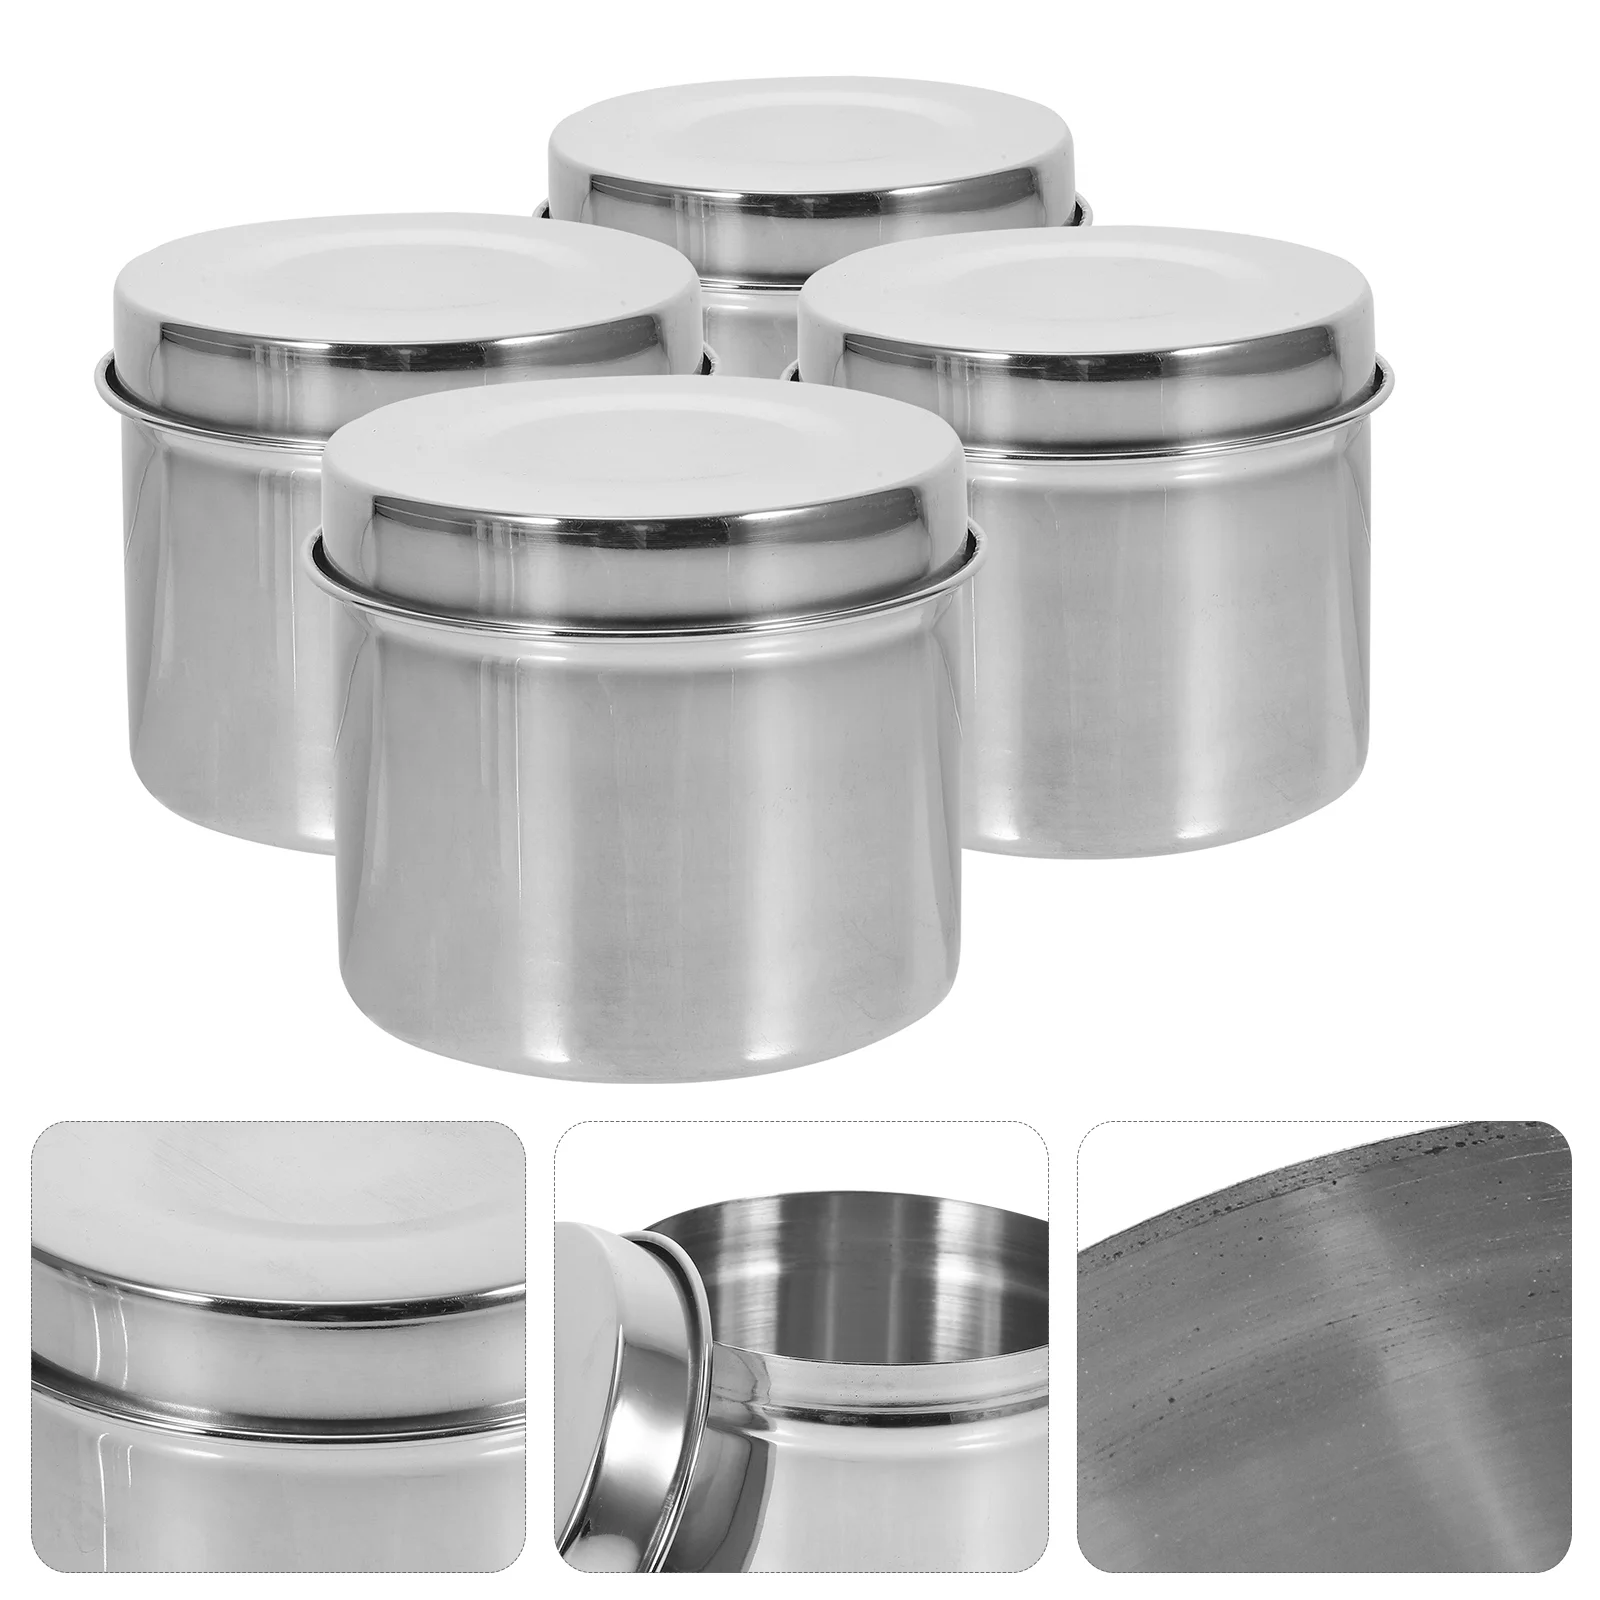 

4 Pcs Metal Container Stainless Food Microwave Safe Containers Lids Steel Storage Fridge